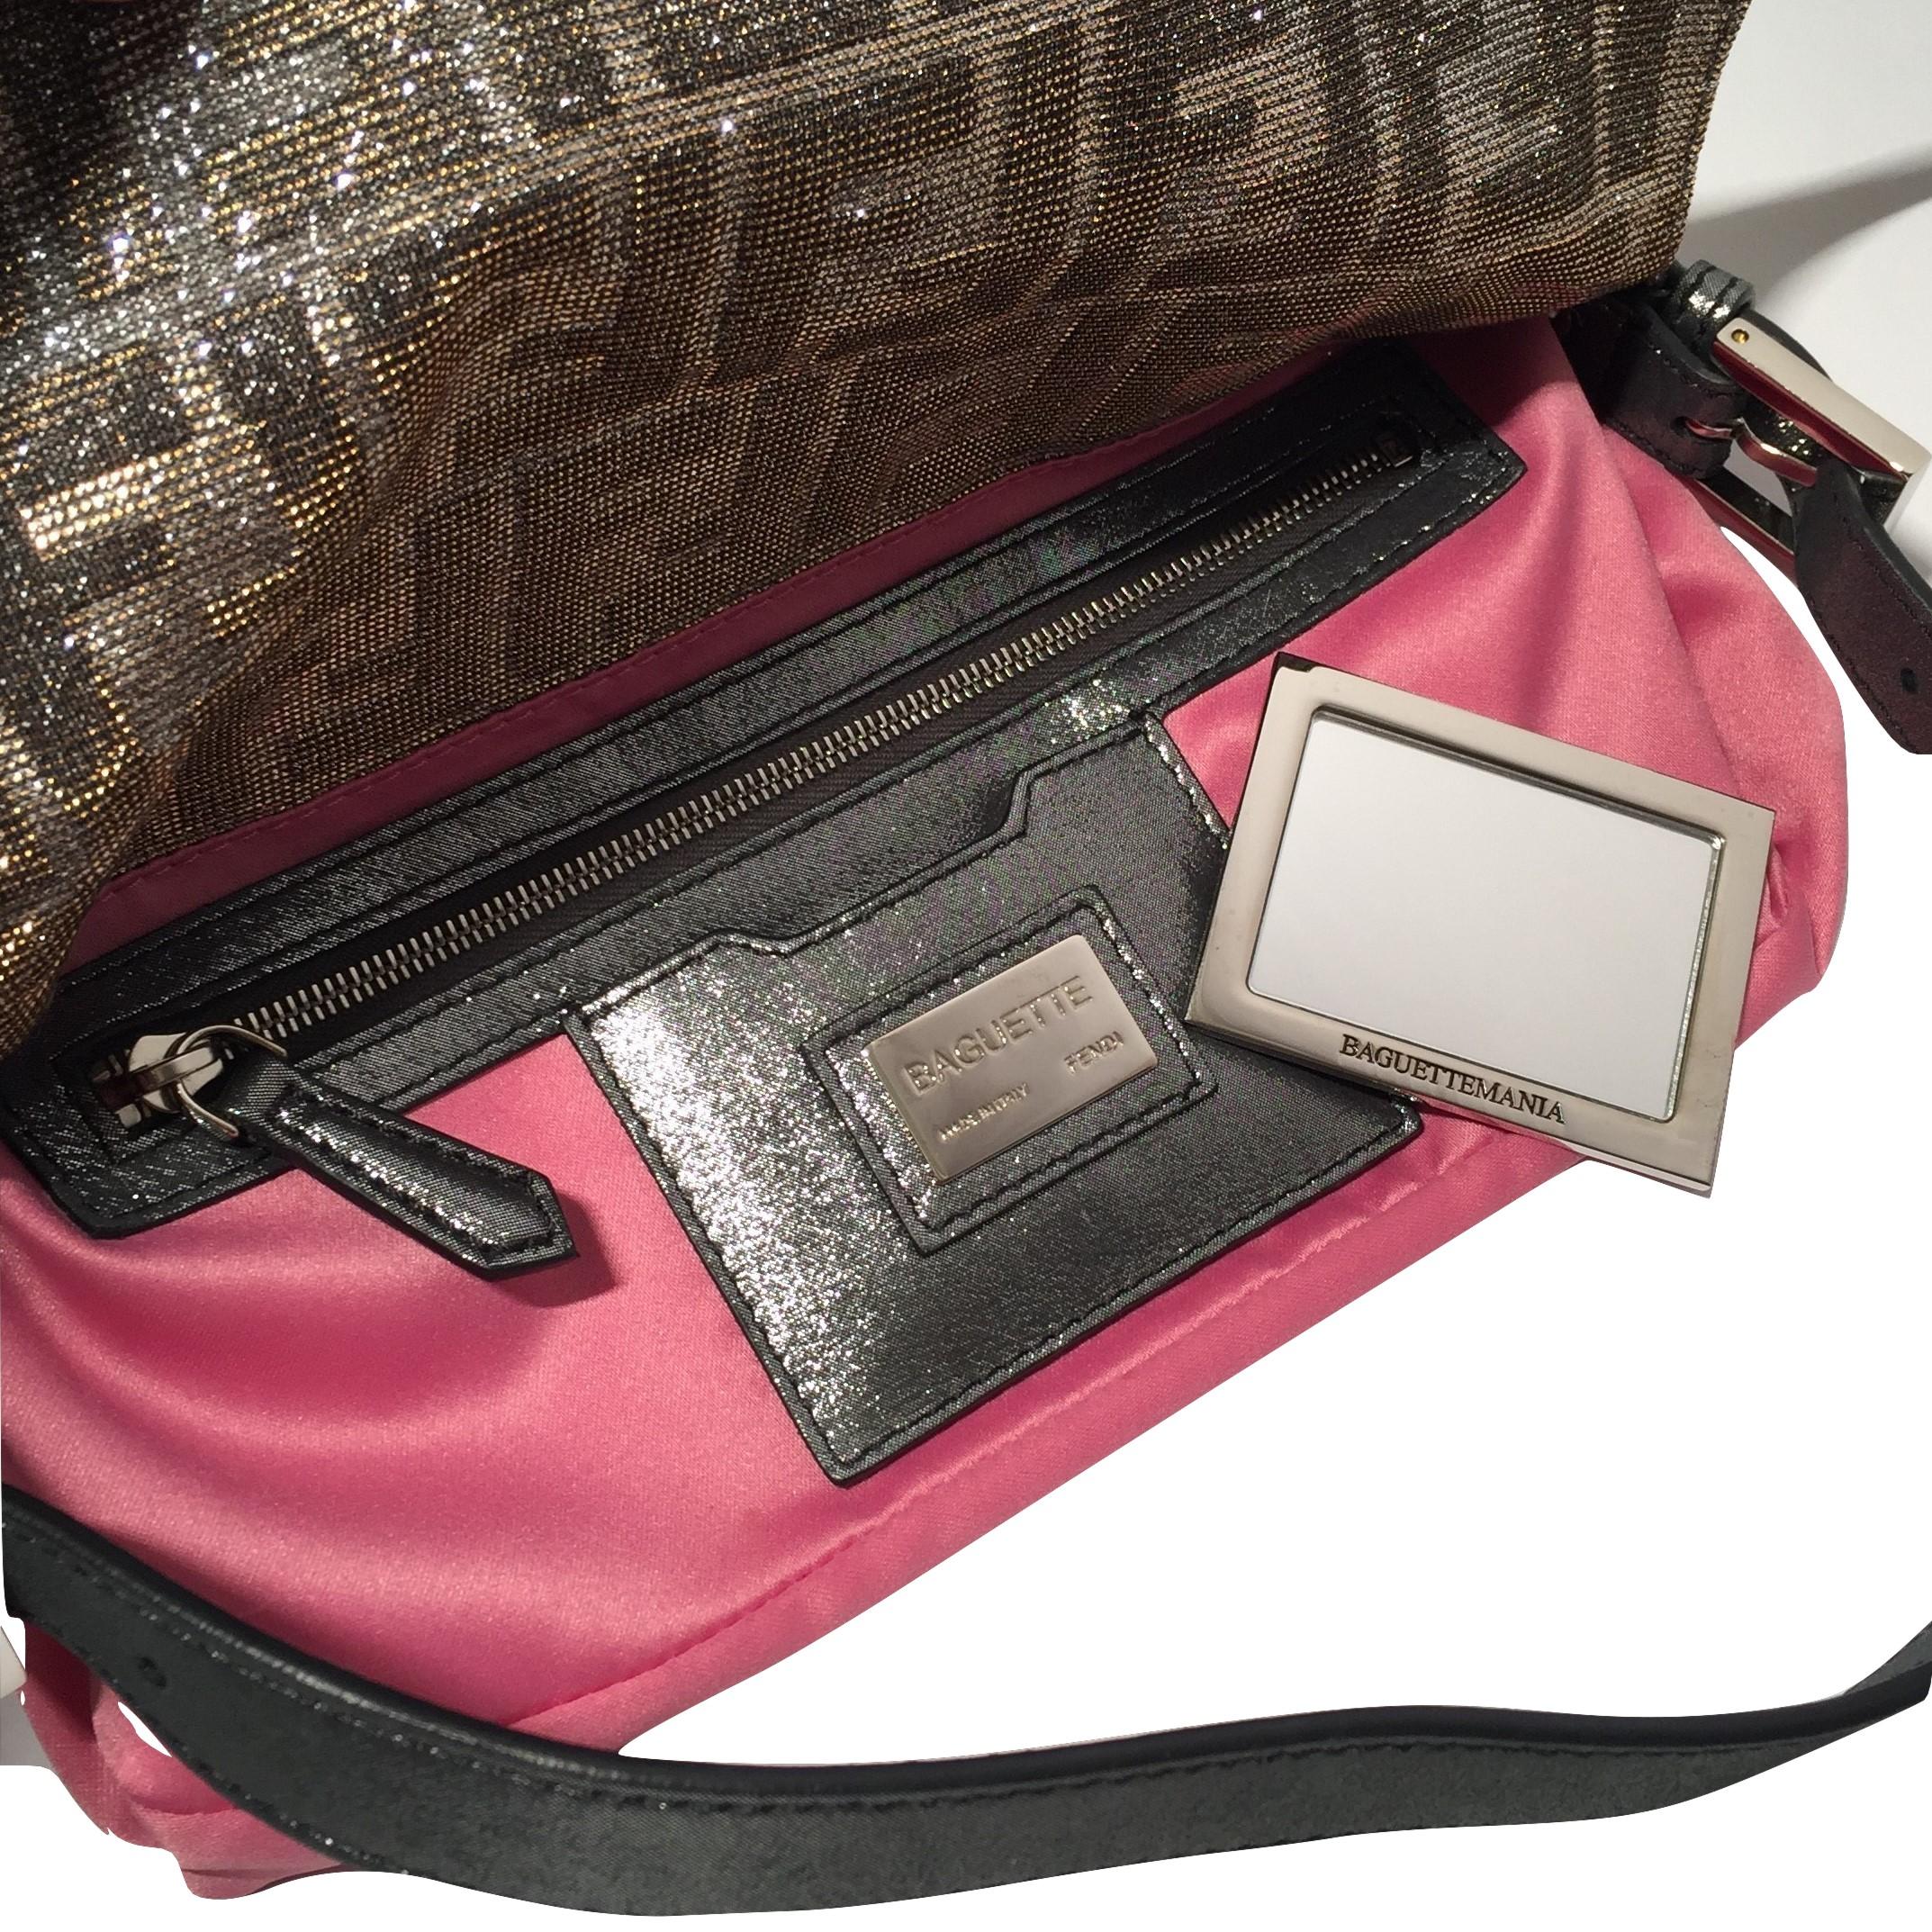 New Fendi Collectors Crystal Baguette Bag Featured in the 15th Anniversary Book 2